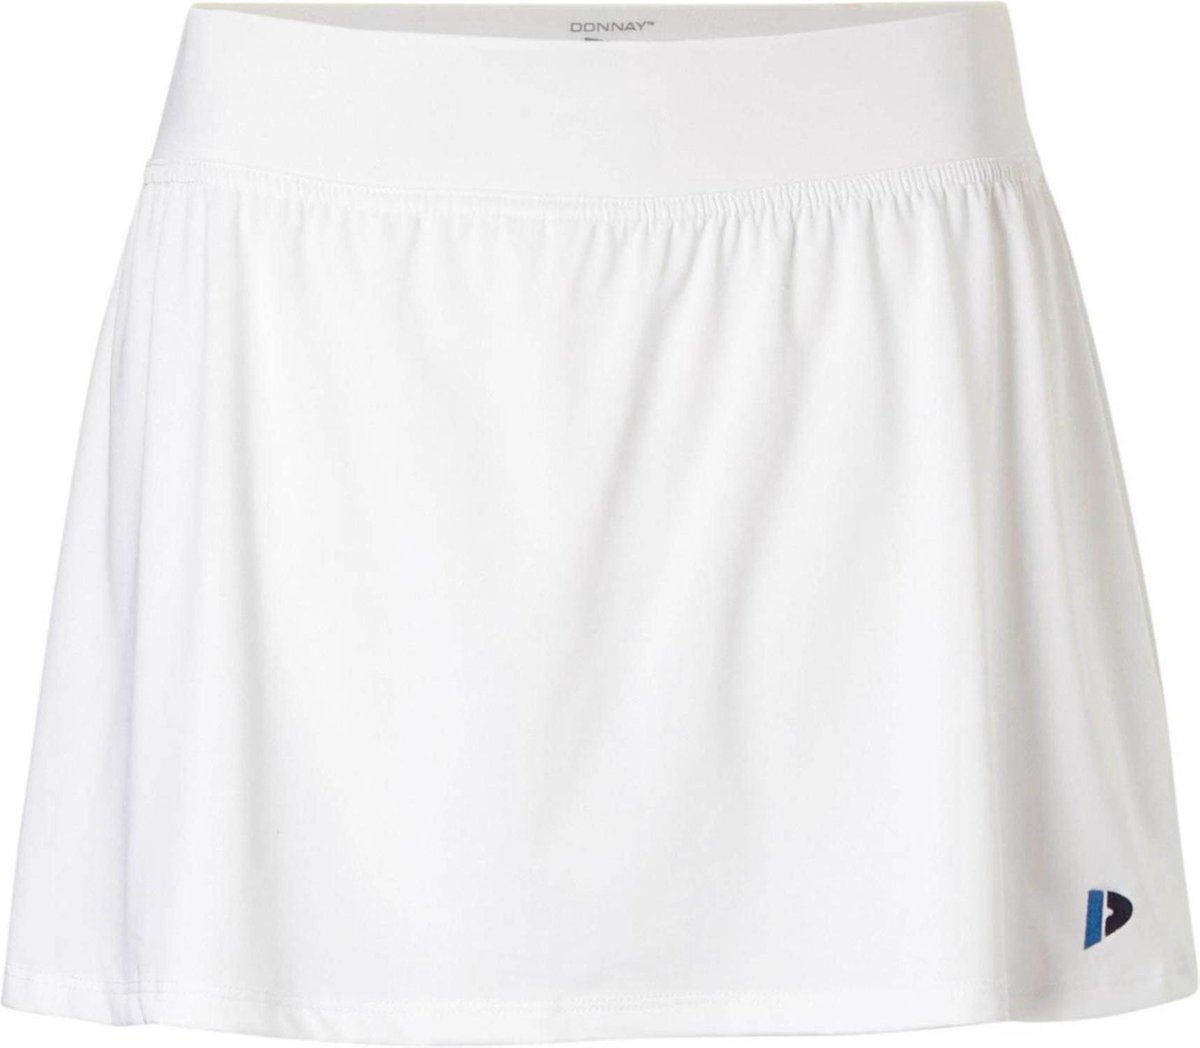 Donnay Cool-Dry skirt - Sportrok - Dames - maat XS - White (001)